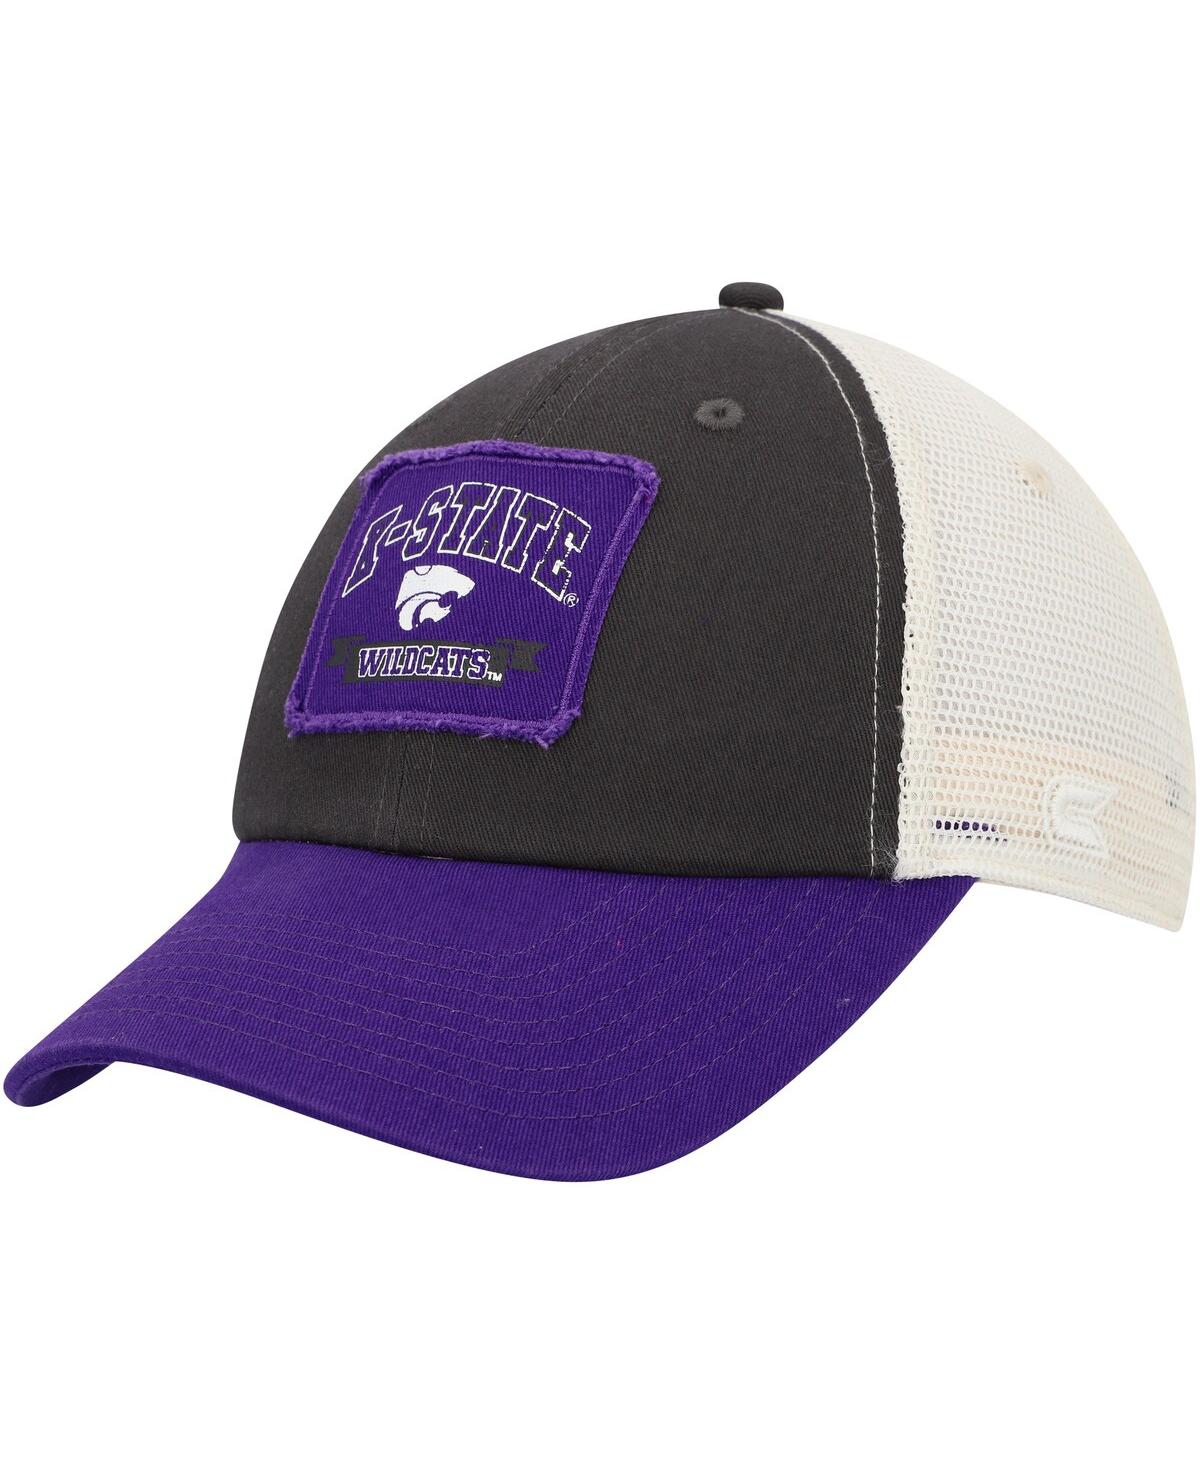 COLOSSEUM MEN'S COLOSSEUM CHARCOAL KANSAS STATE WILDCATS OBJECTION SNAPBACK HAT